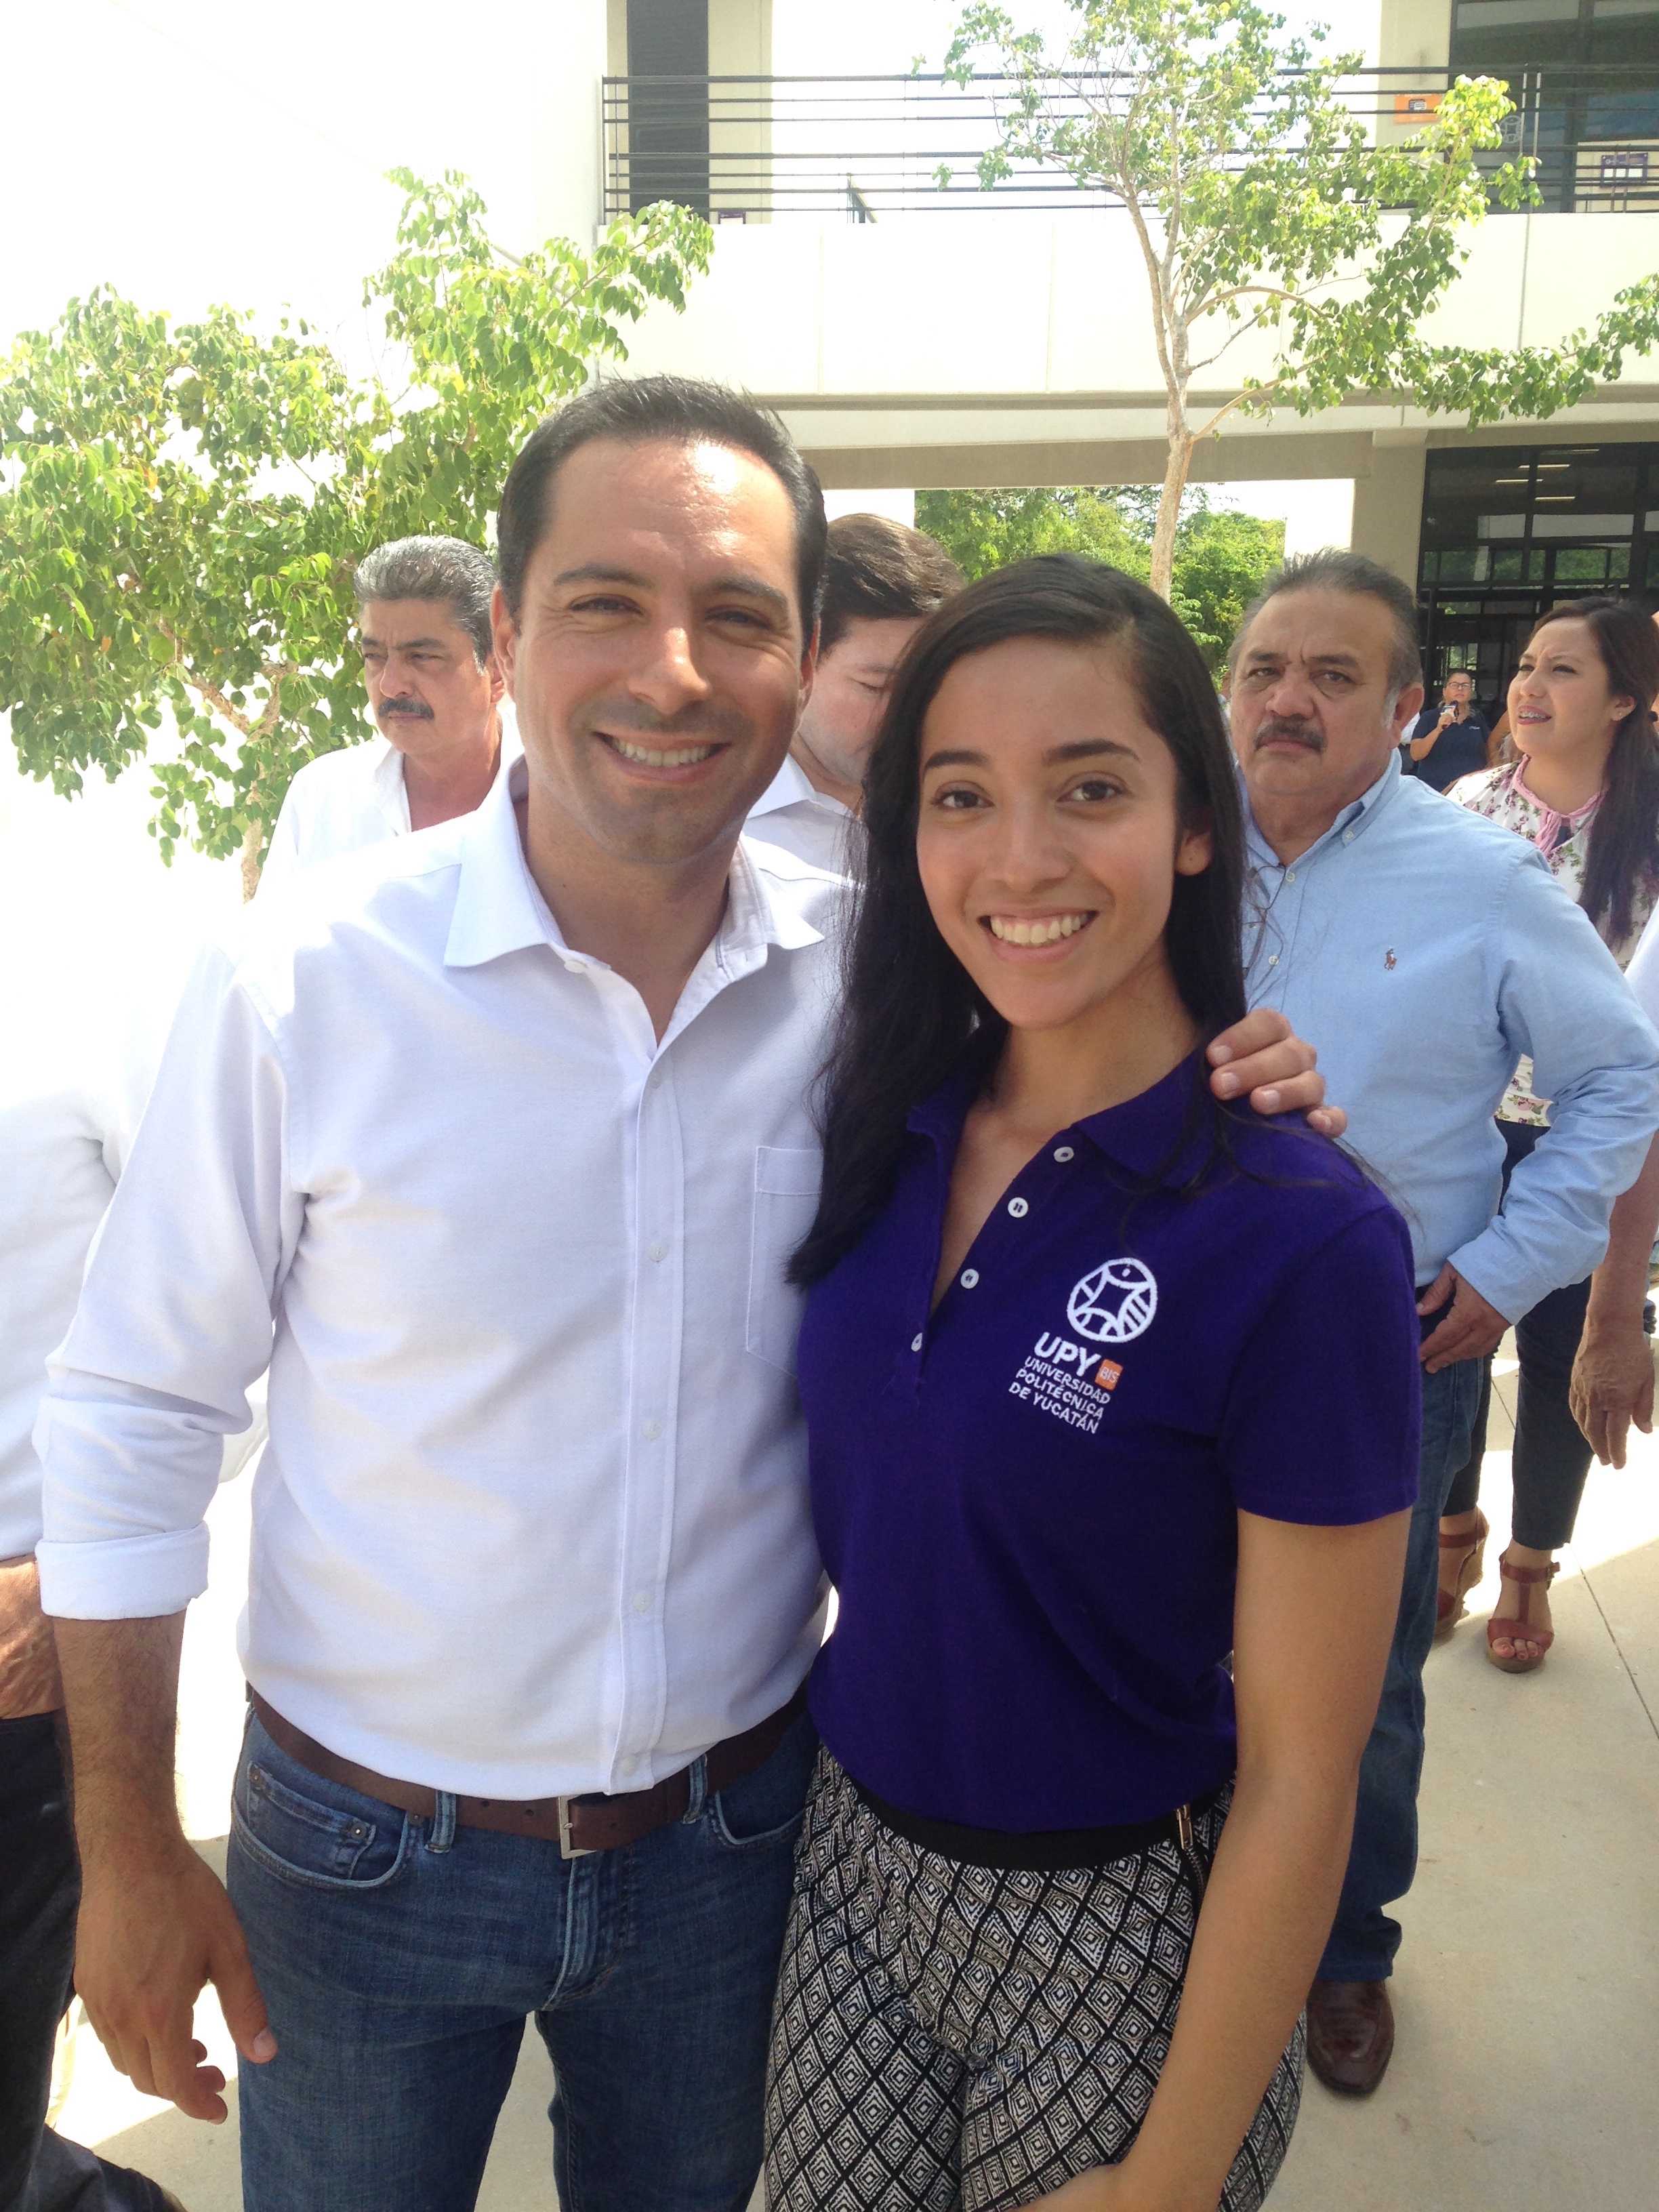 Lizette with the President of Yucatan